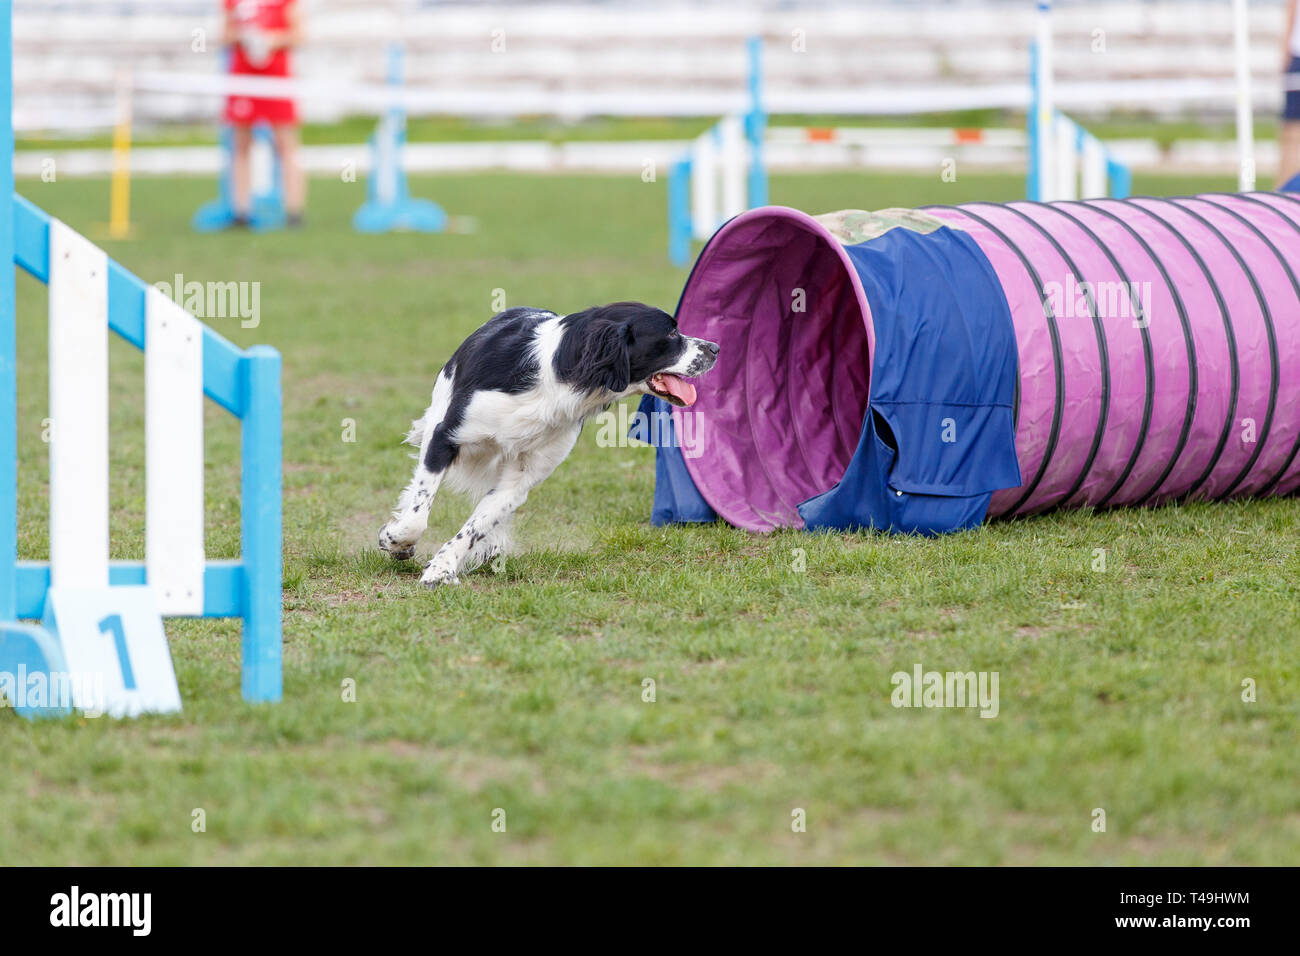 Espanol breton running out from tube on dog agility test Stock Photo